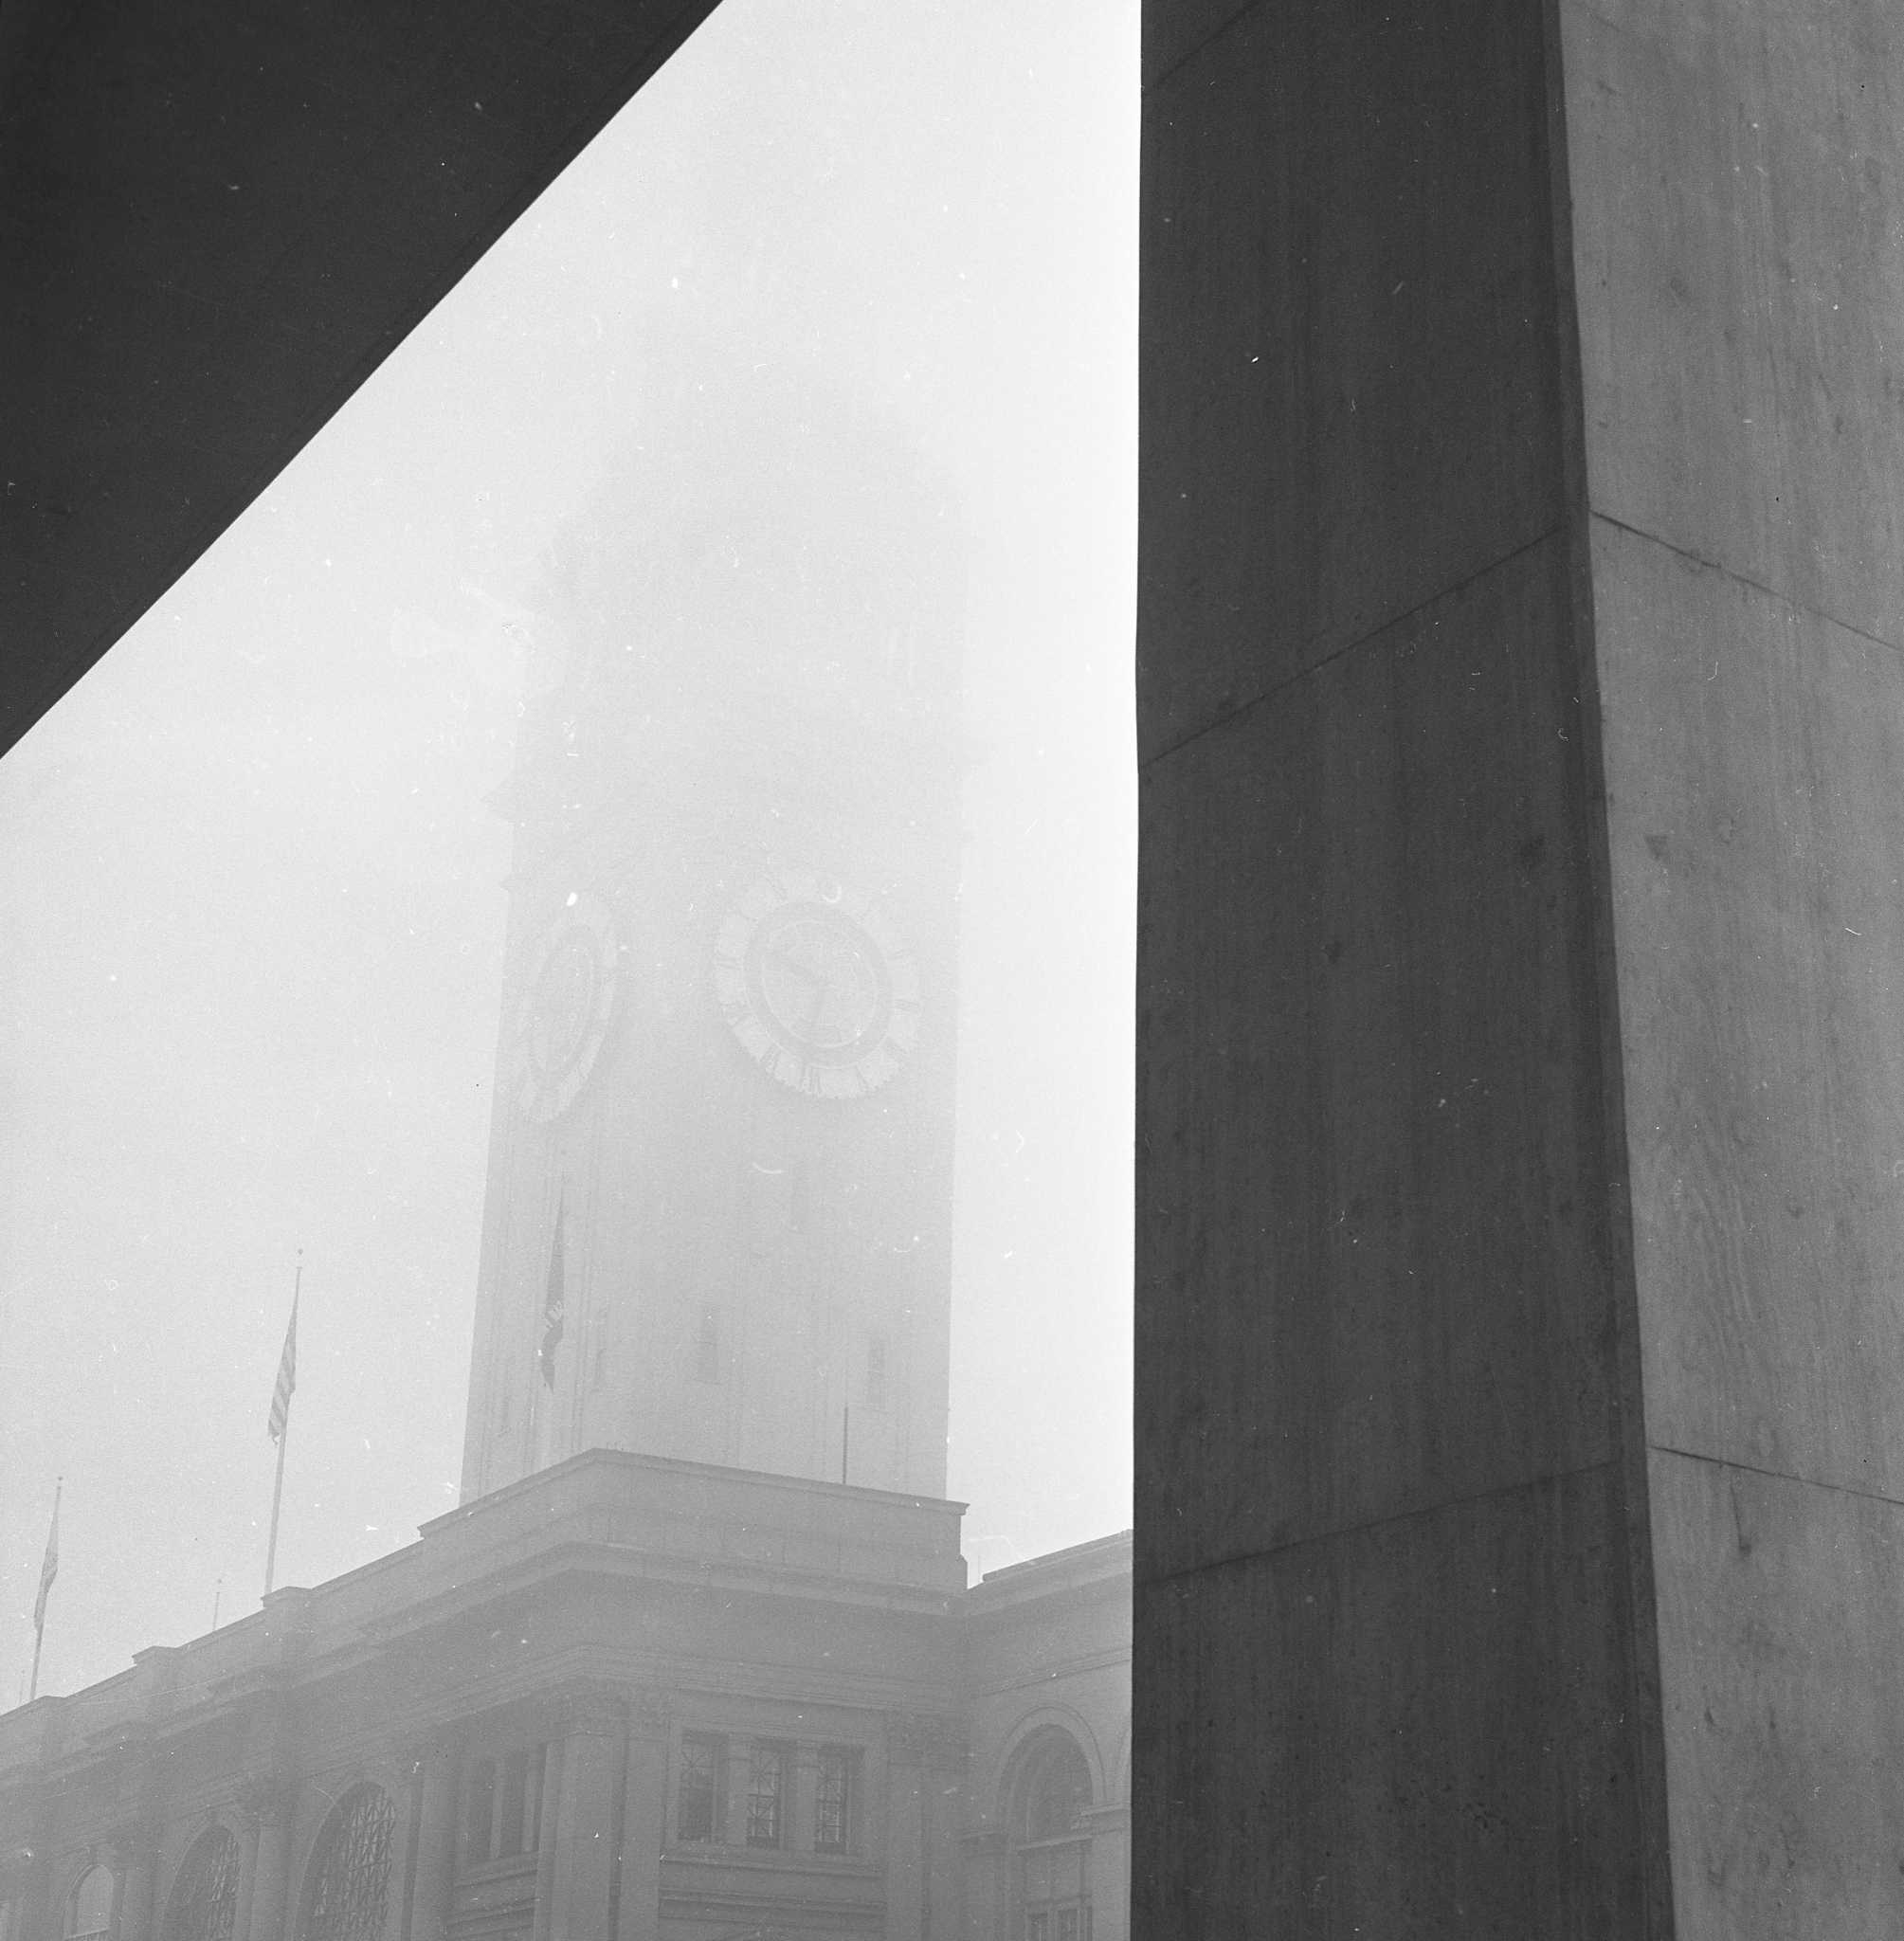 Untitled - San Francisco in the Fog For Sale at 1stDibs